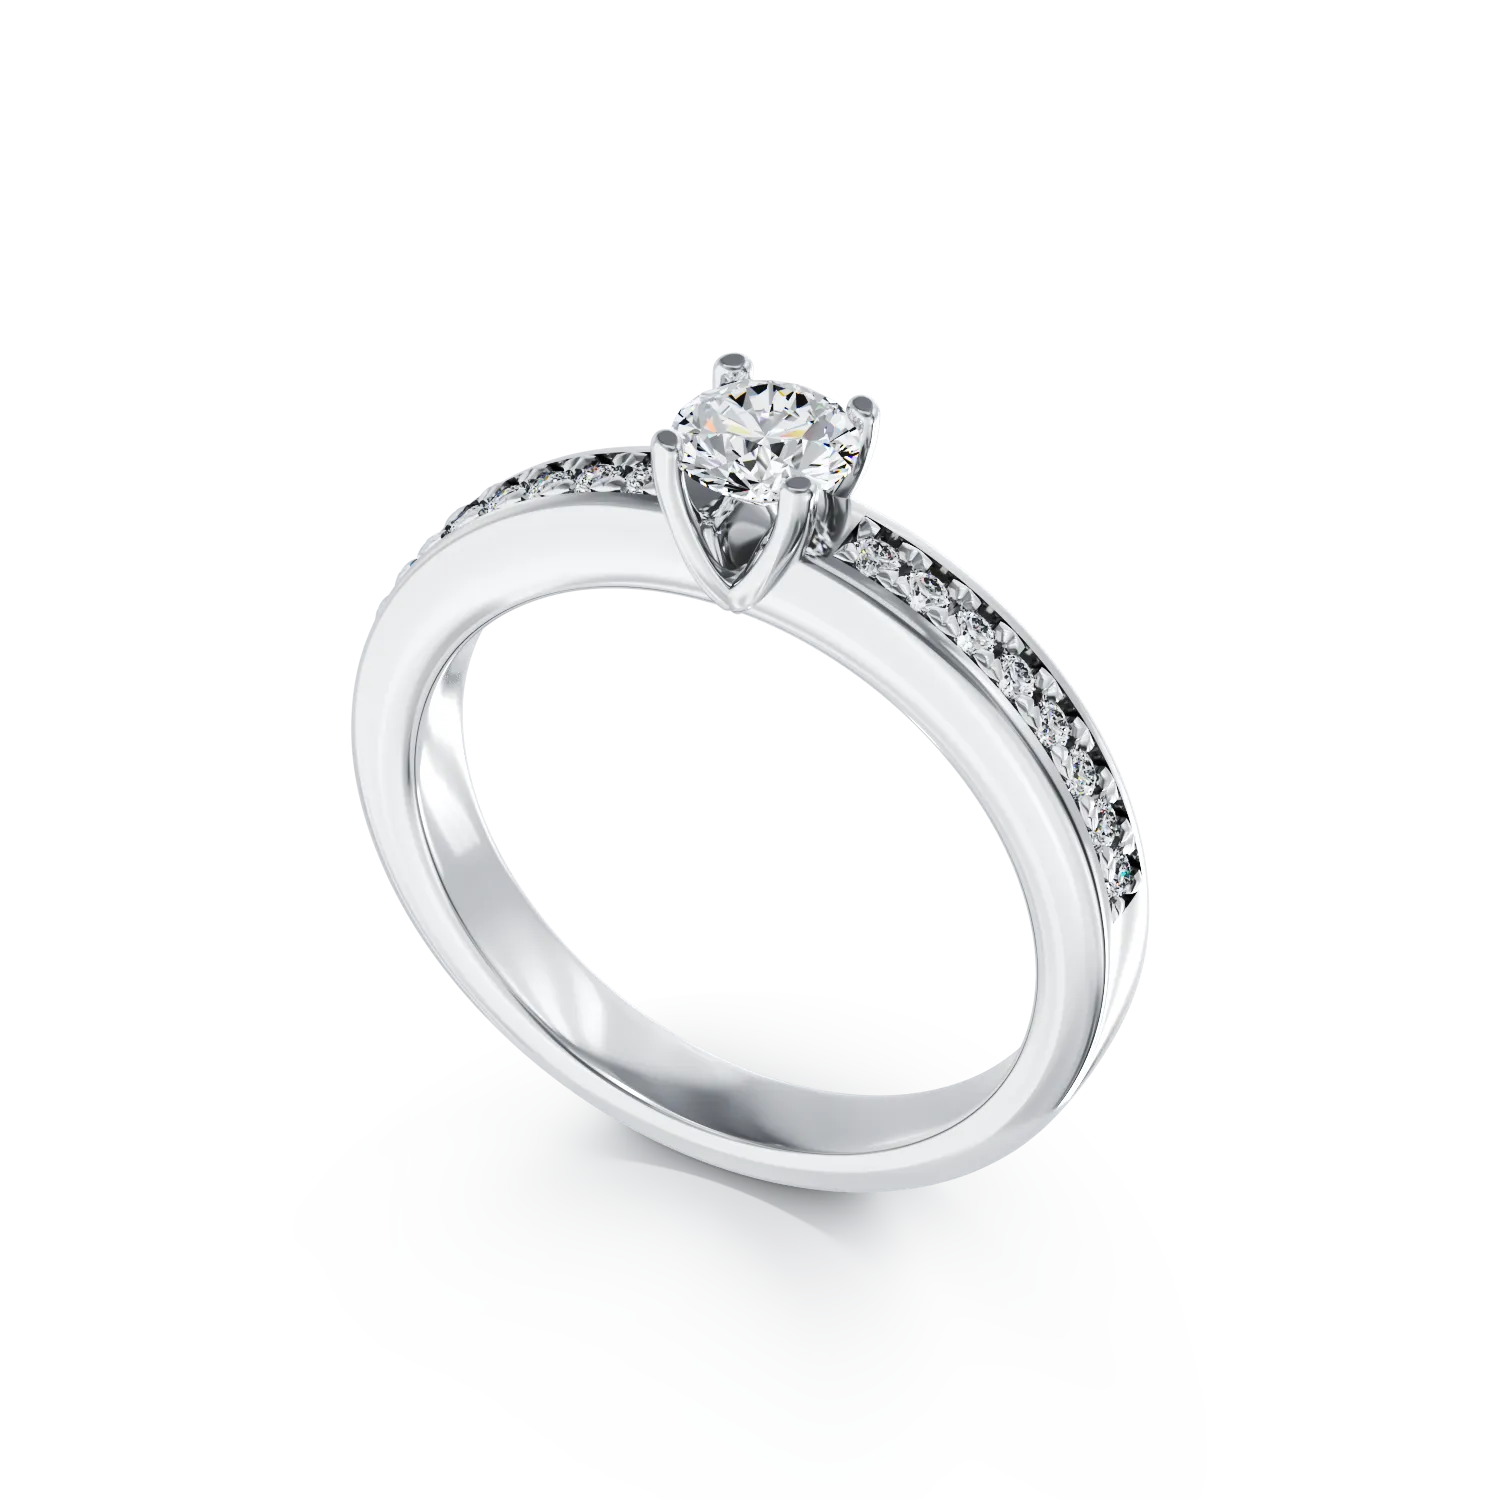 18K white gold engagement ring with 0.3ct diamond and 0.08ct diamonds